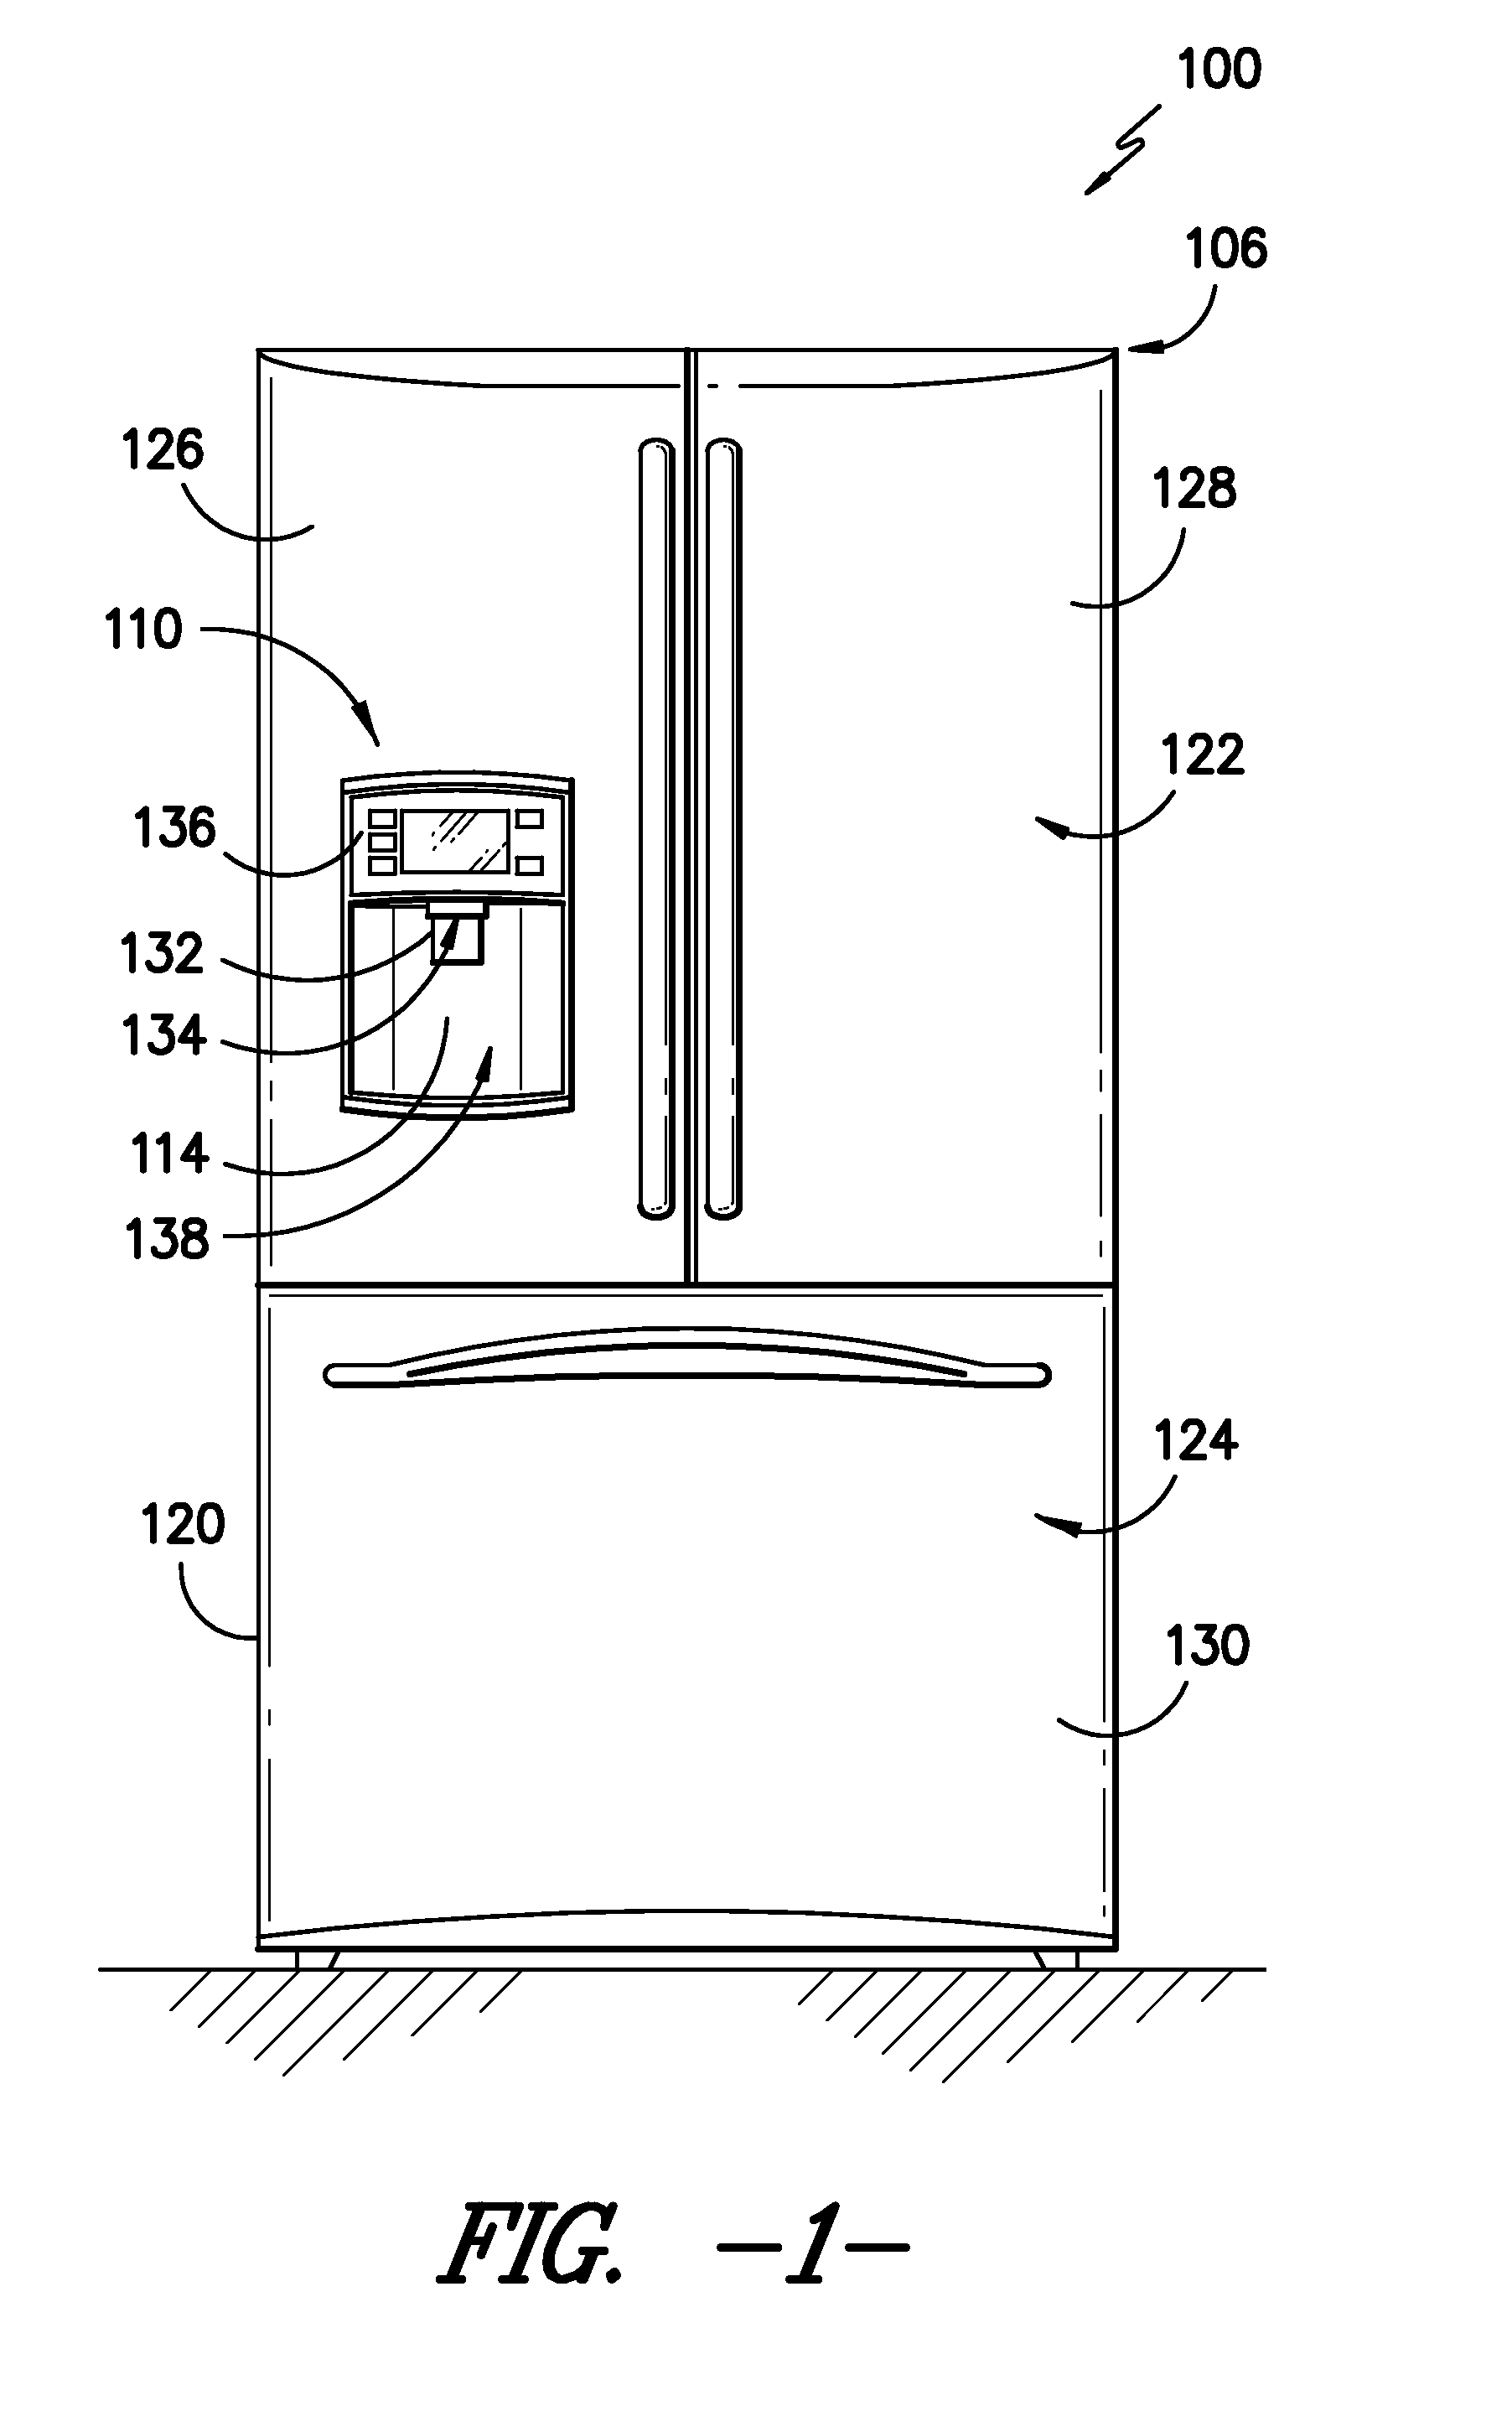 Refrigerator appliance with features for assisted dispensing